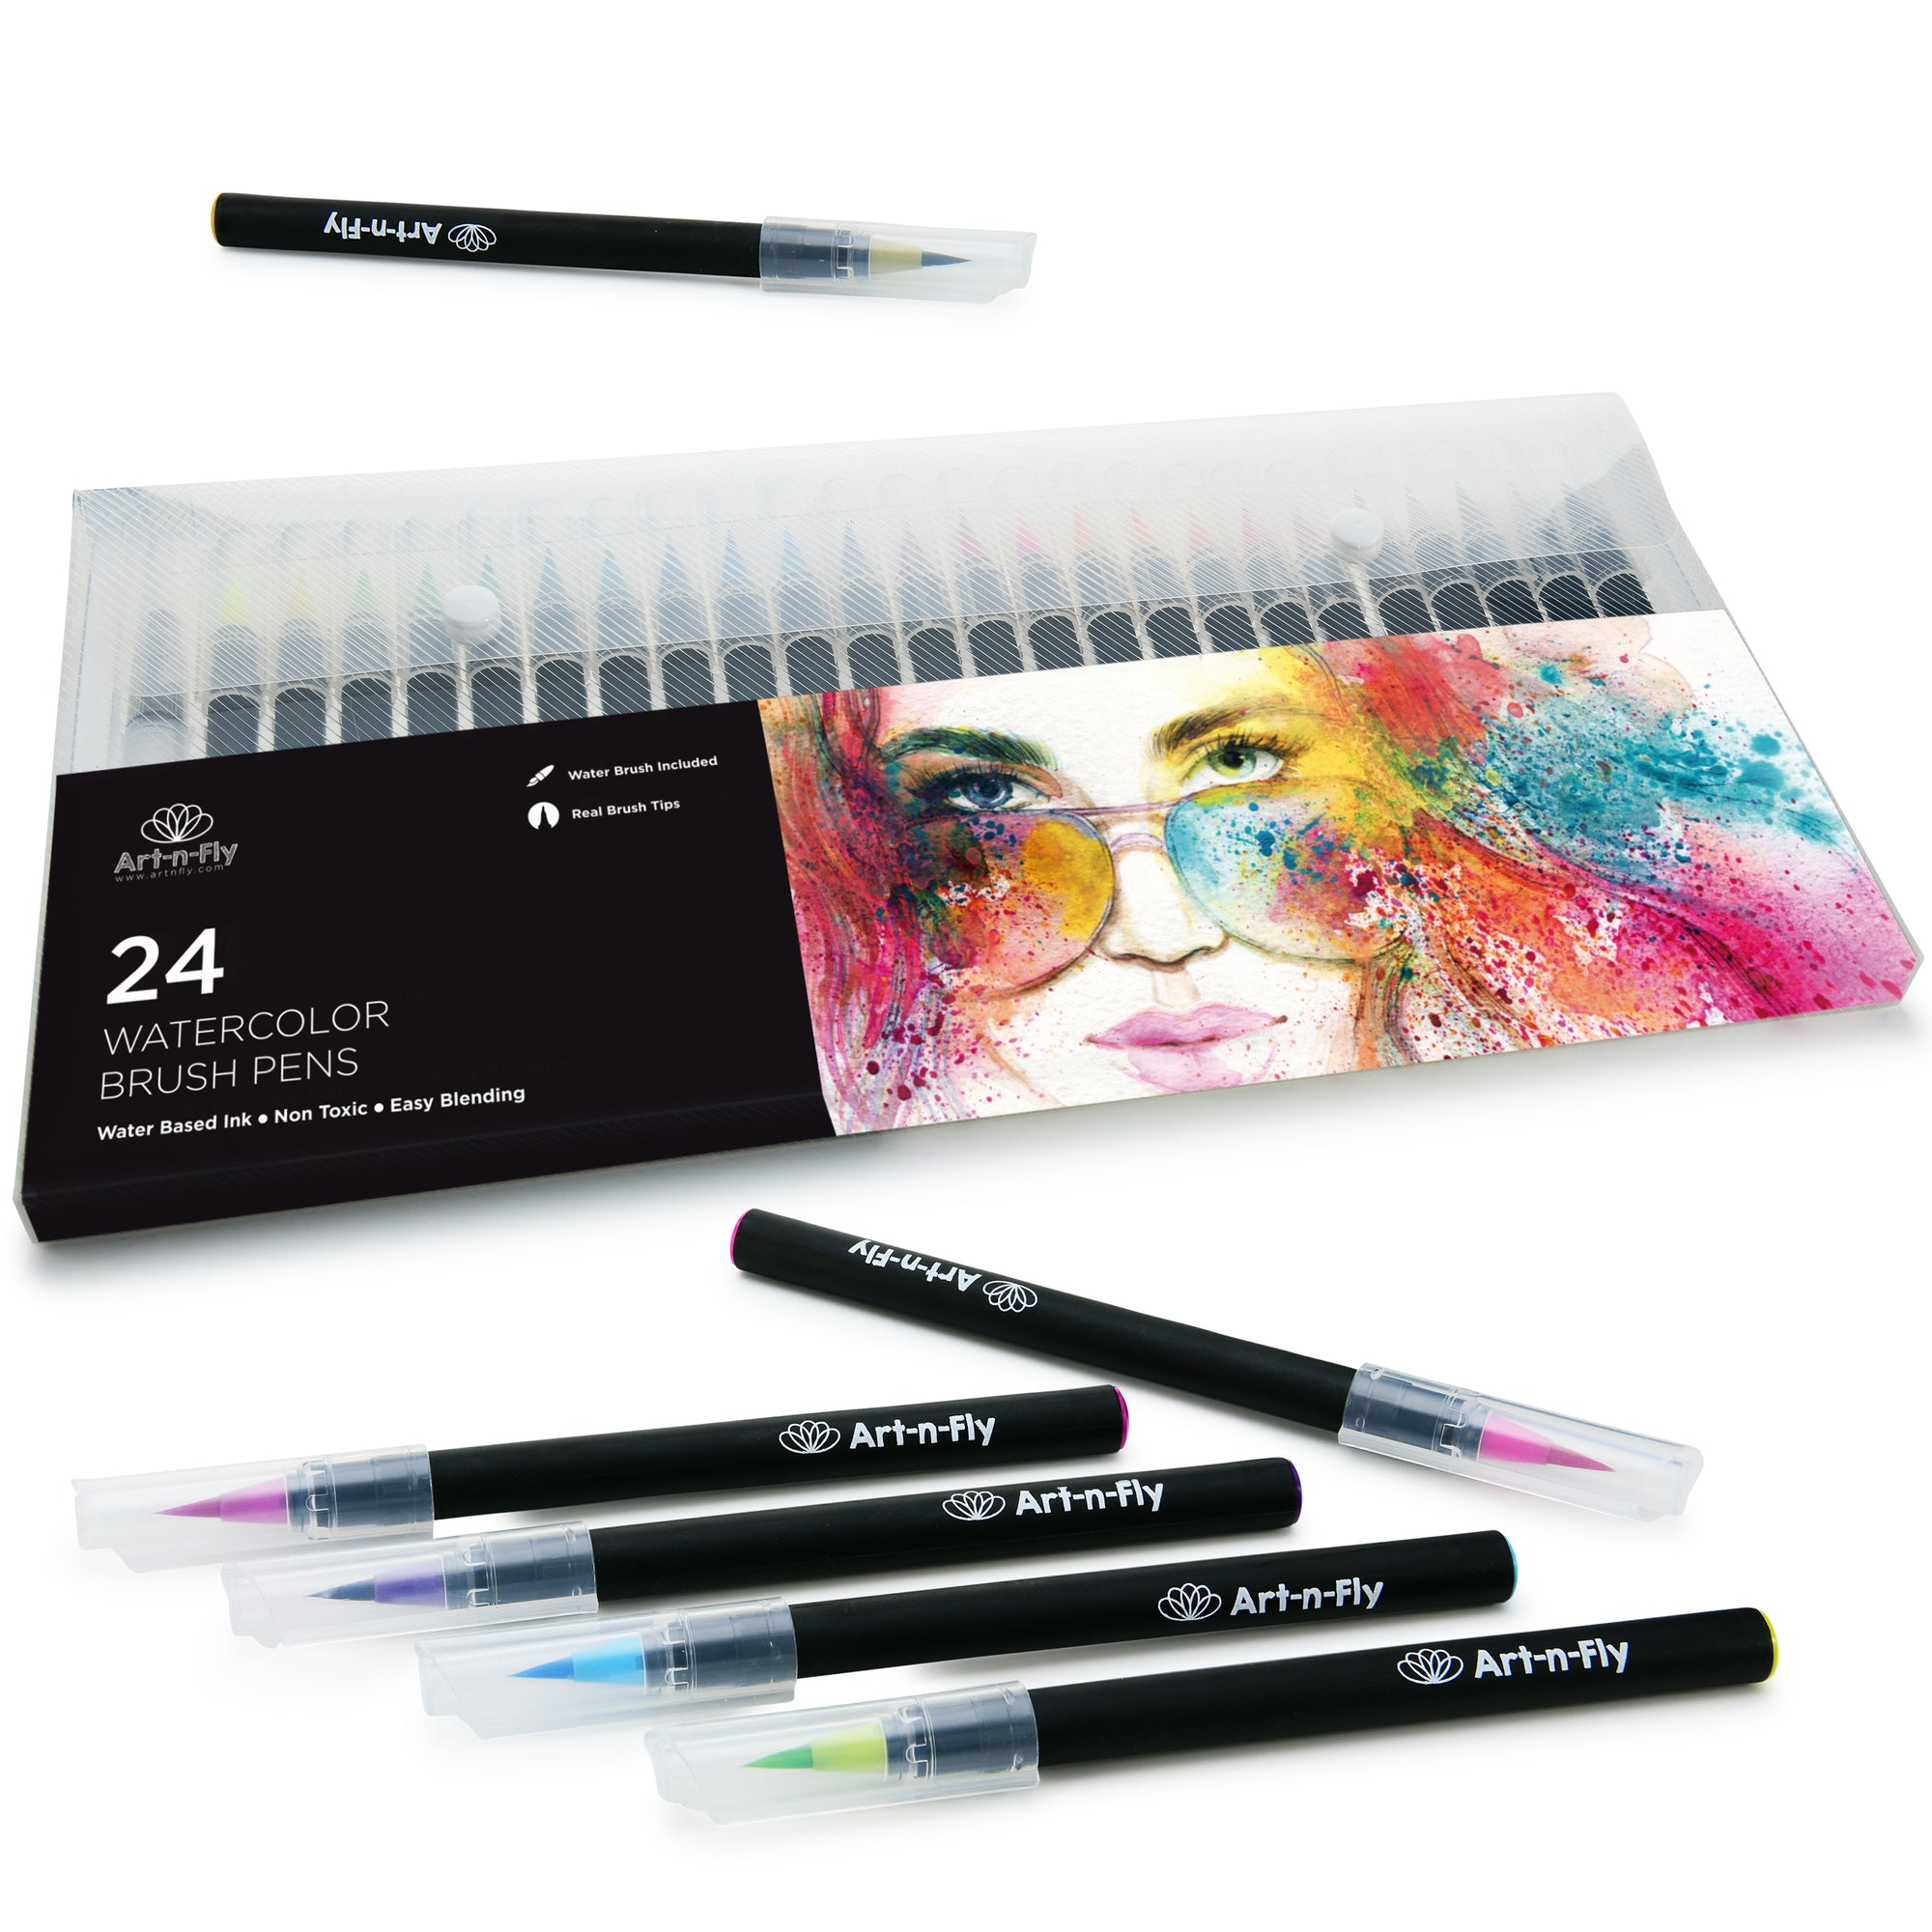 Net Focus Media Watercolor Brush Pens – Includes 24 Colorful Watercolor  Markers (Flexible Nylon Brush Tips) With 1 Refillable Water Blending Brush, Watercolor Paint Pens Art Supplies For Teens, Kids And Adults